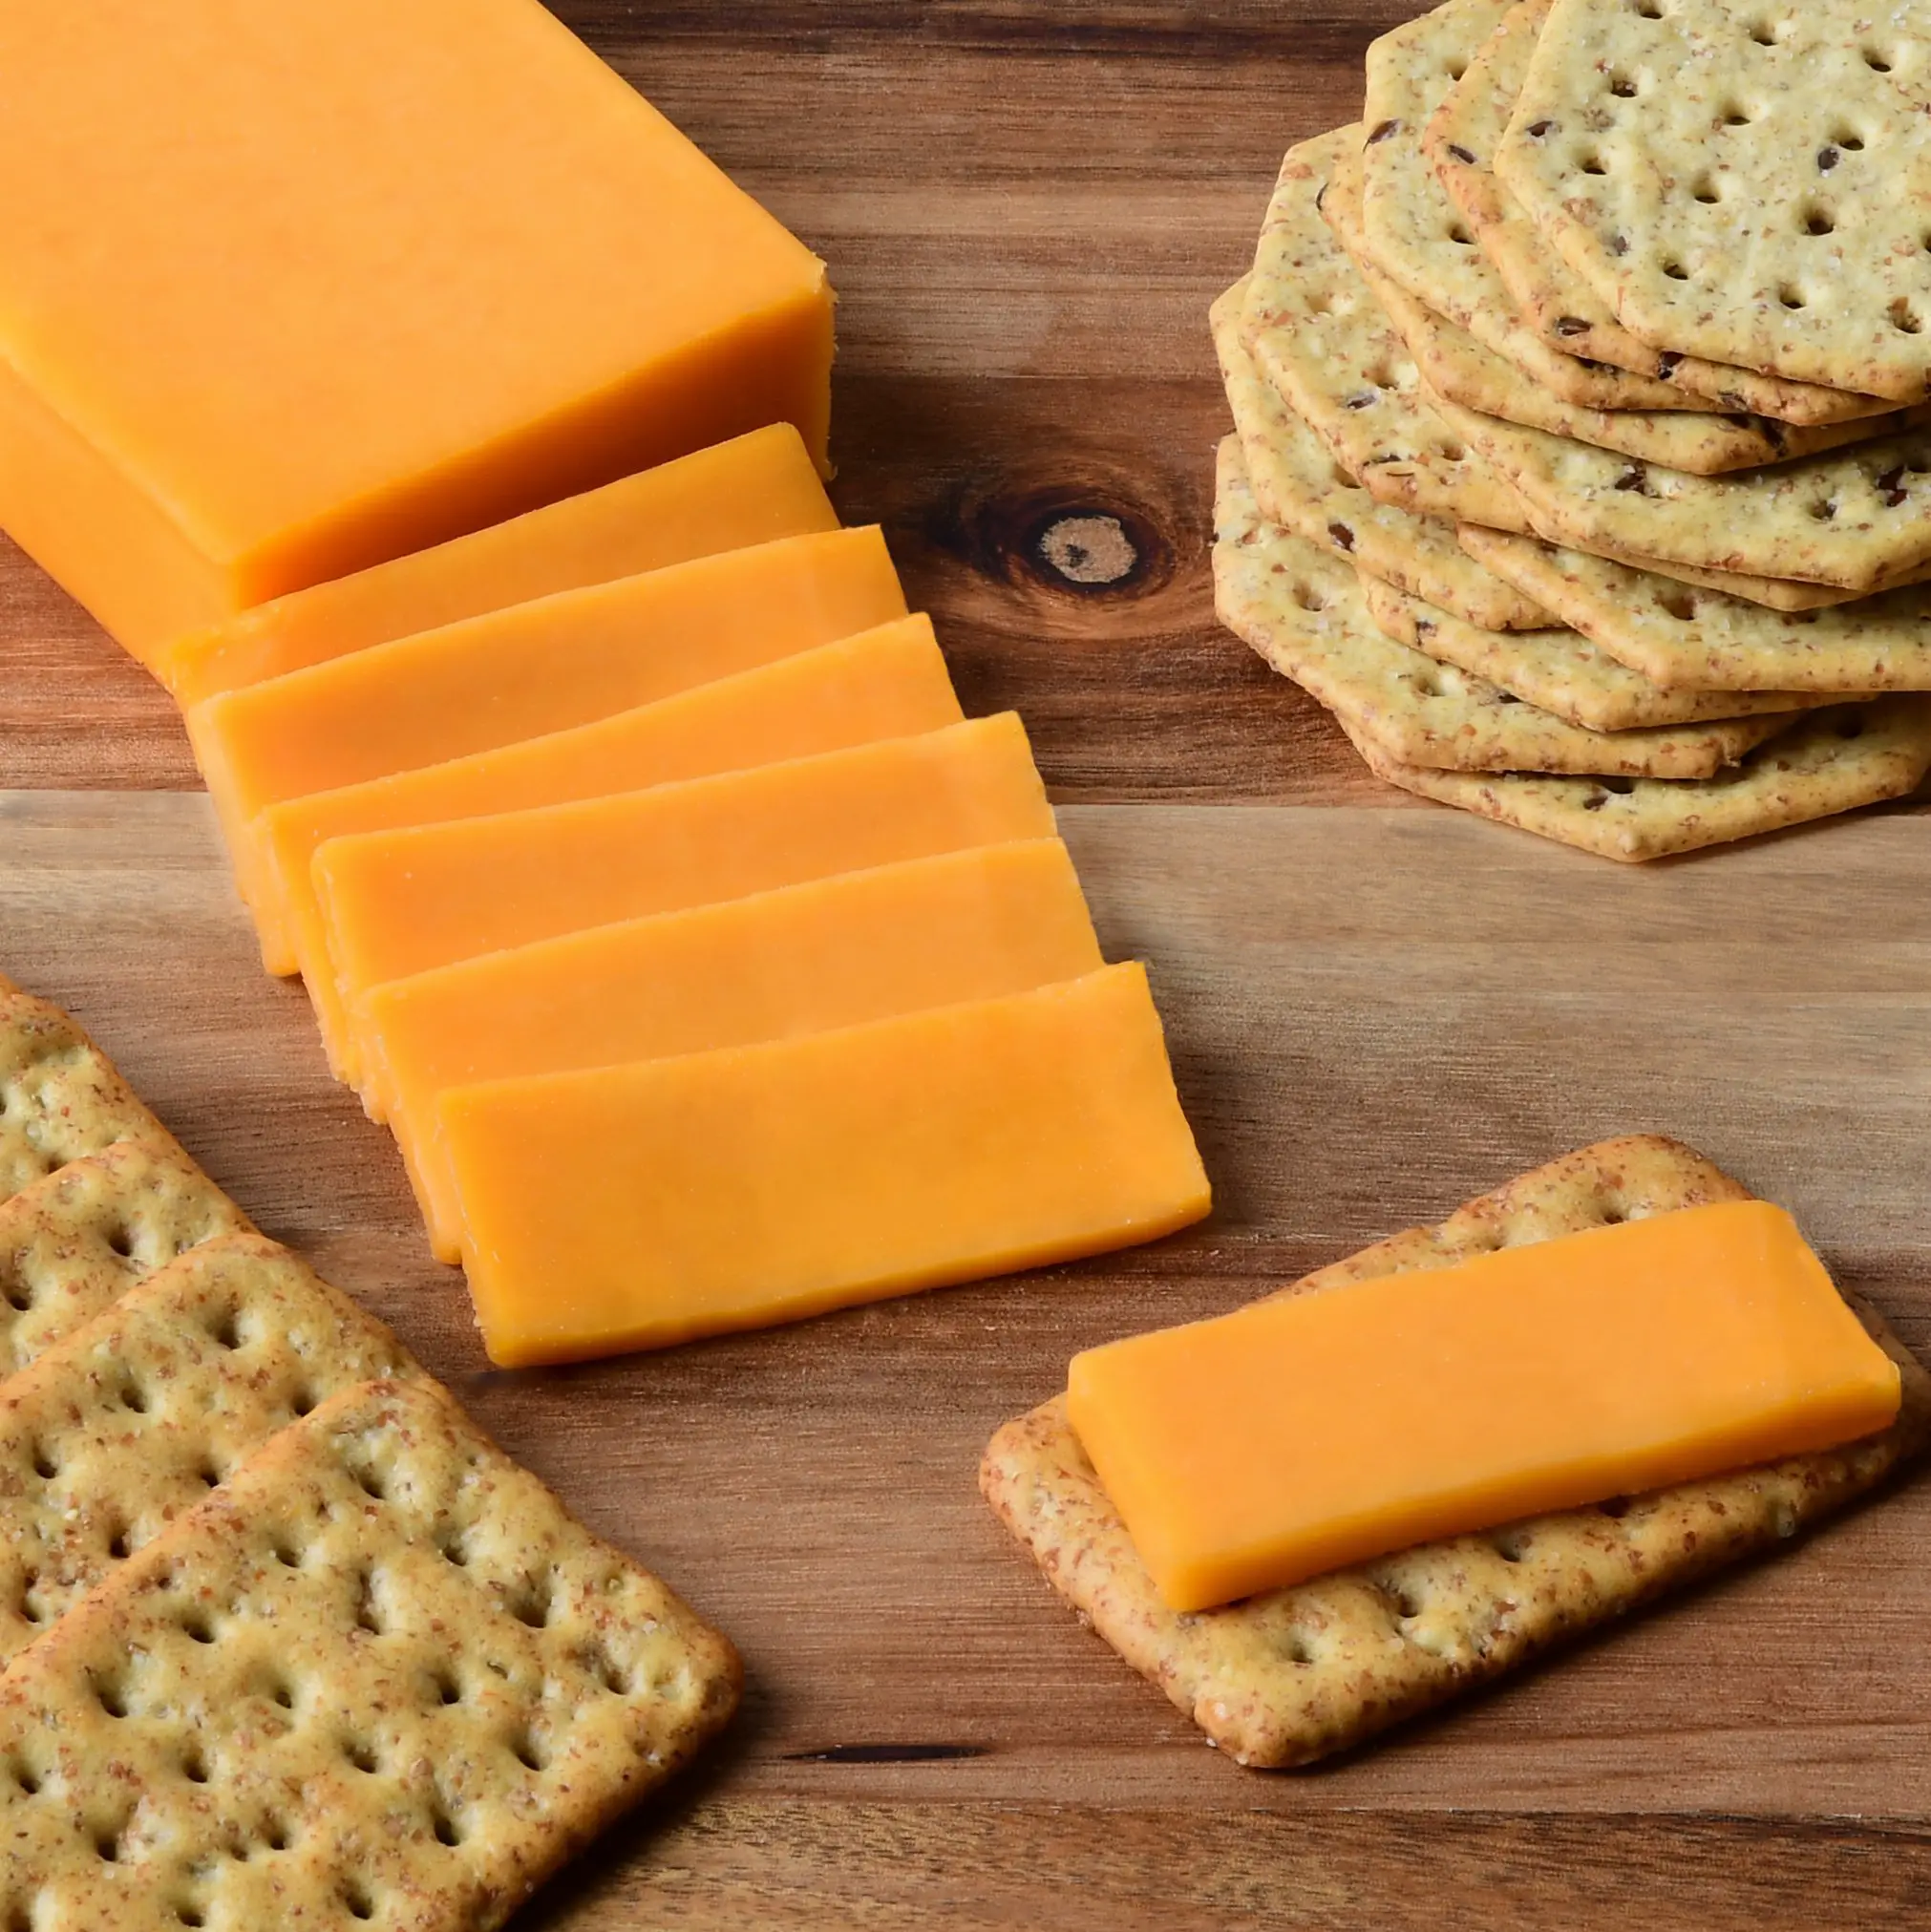 15 Different Types of Cheese Everyone Should Know